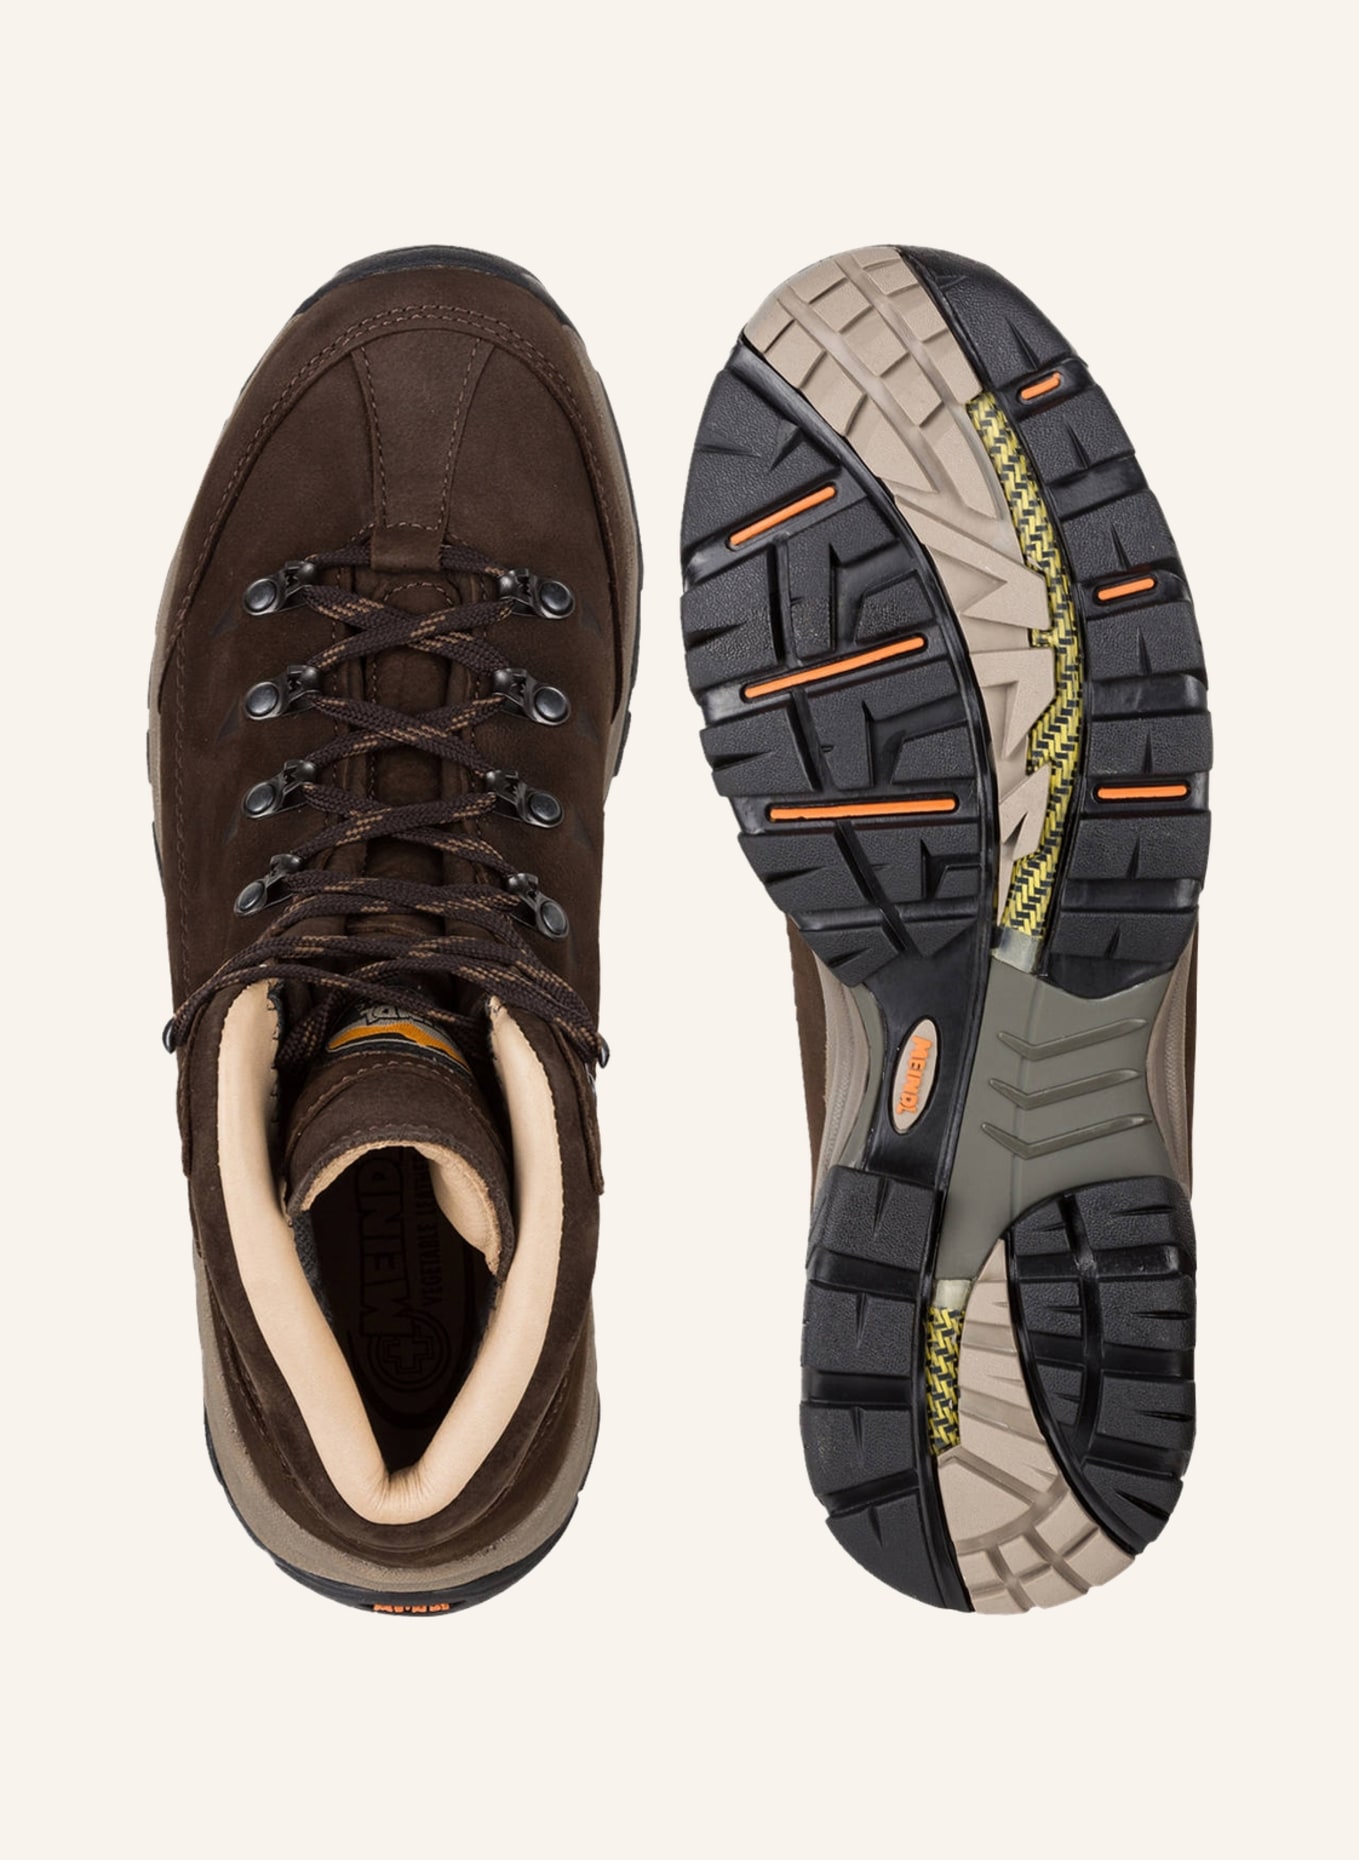 MEINDL Outdoor shoes OHIO 2 GTX, Color: BROWN (Image 5)